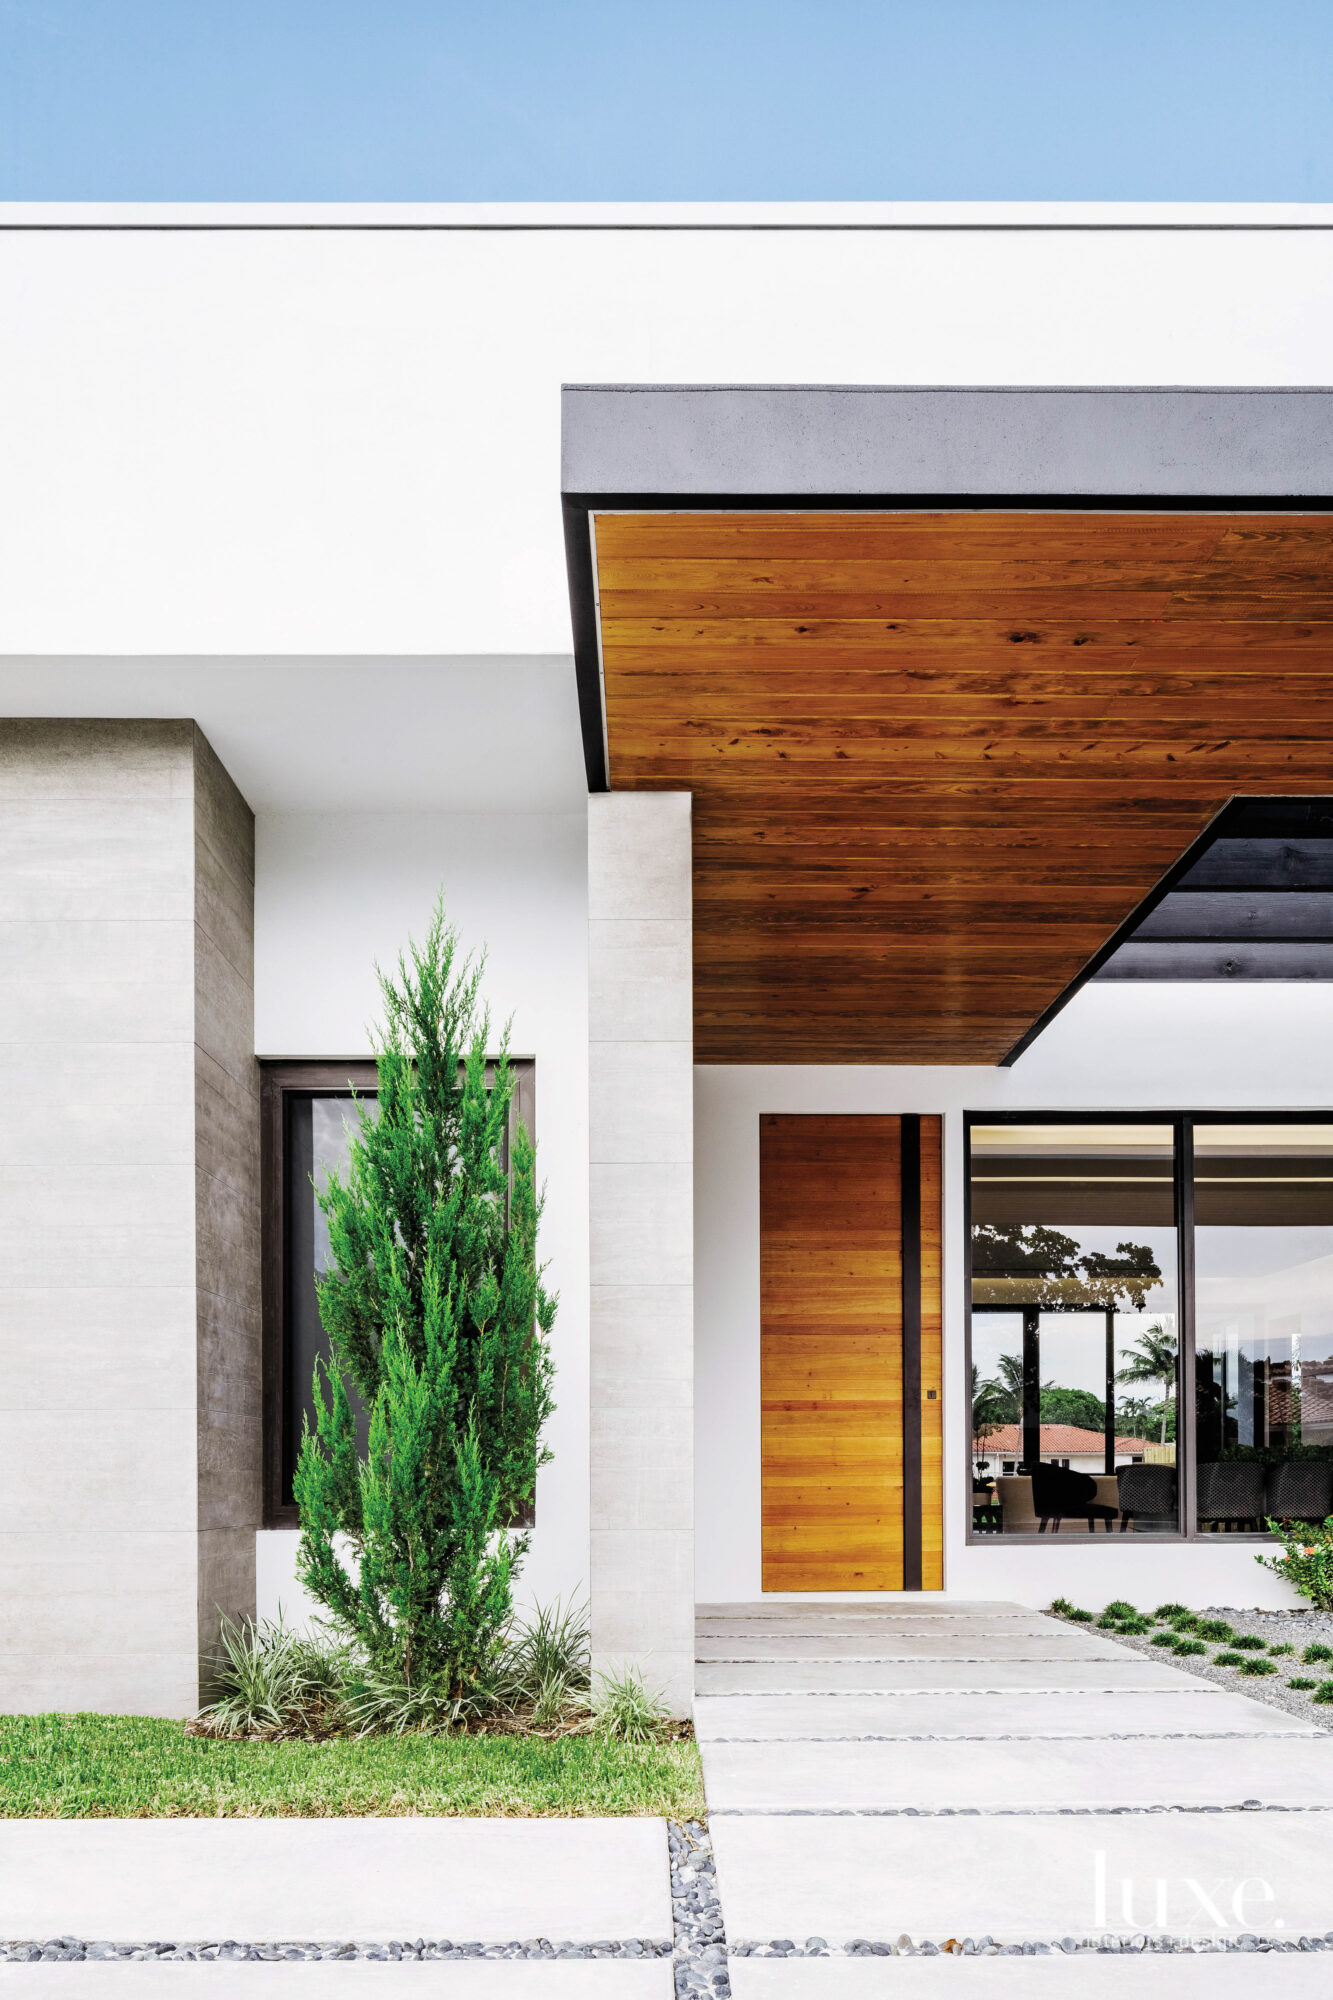 The exterior of the house features a concrete tile walkway leading to a walnut door